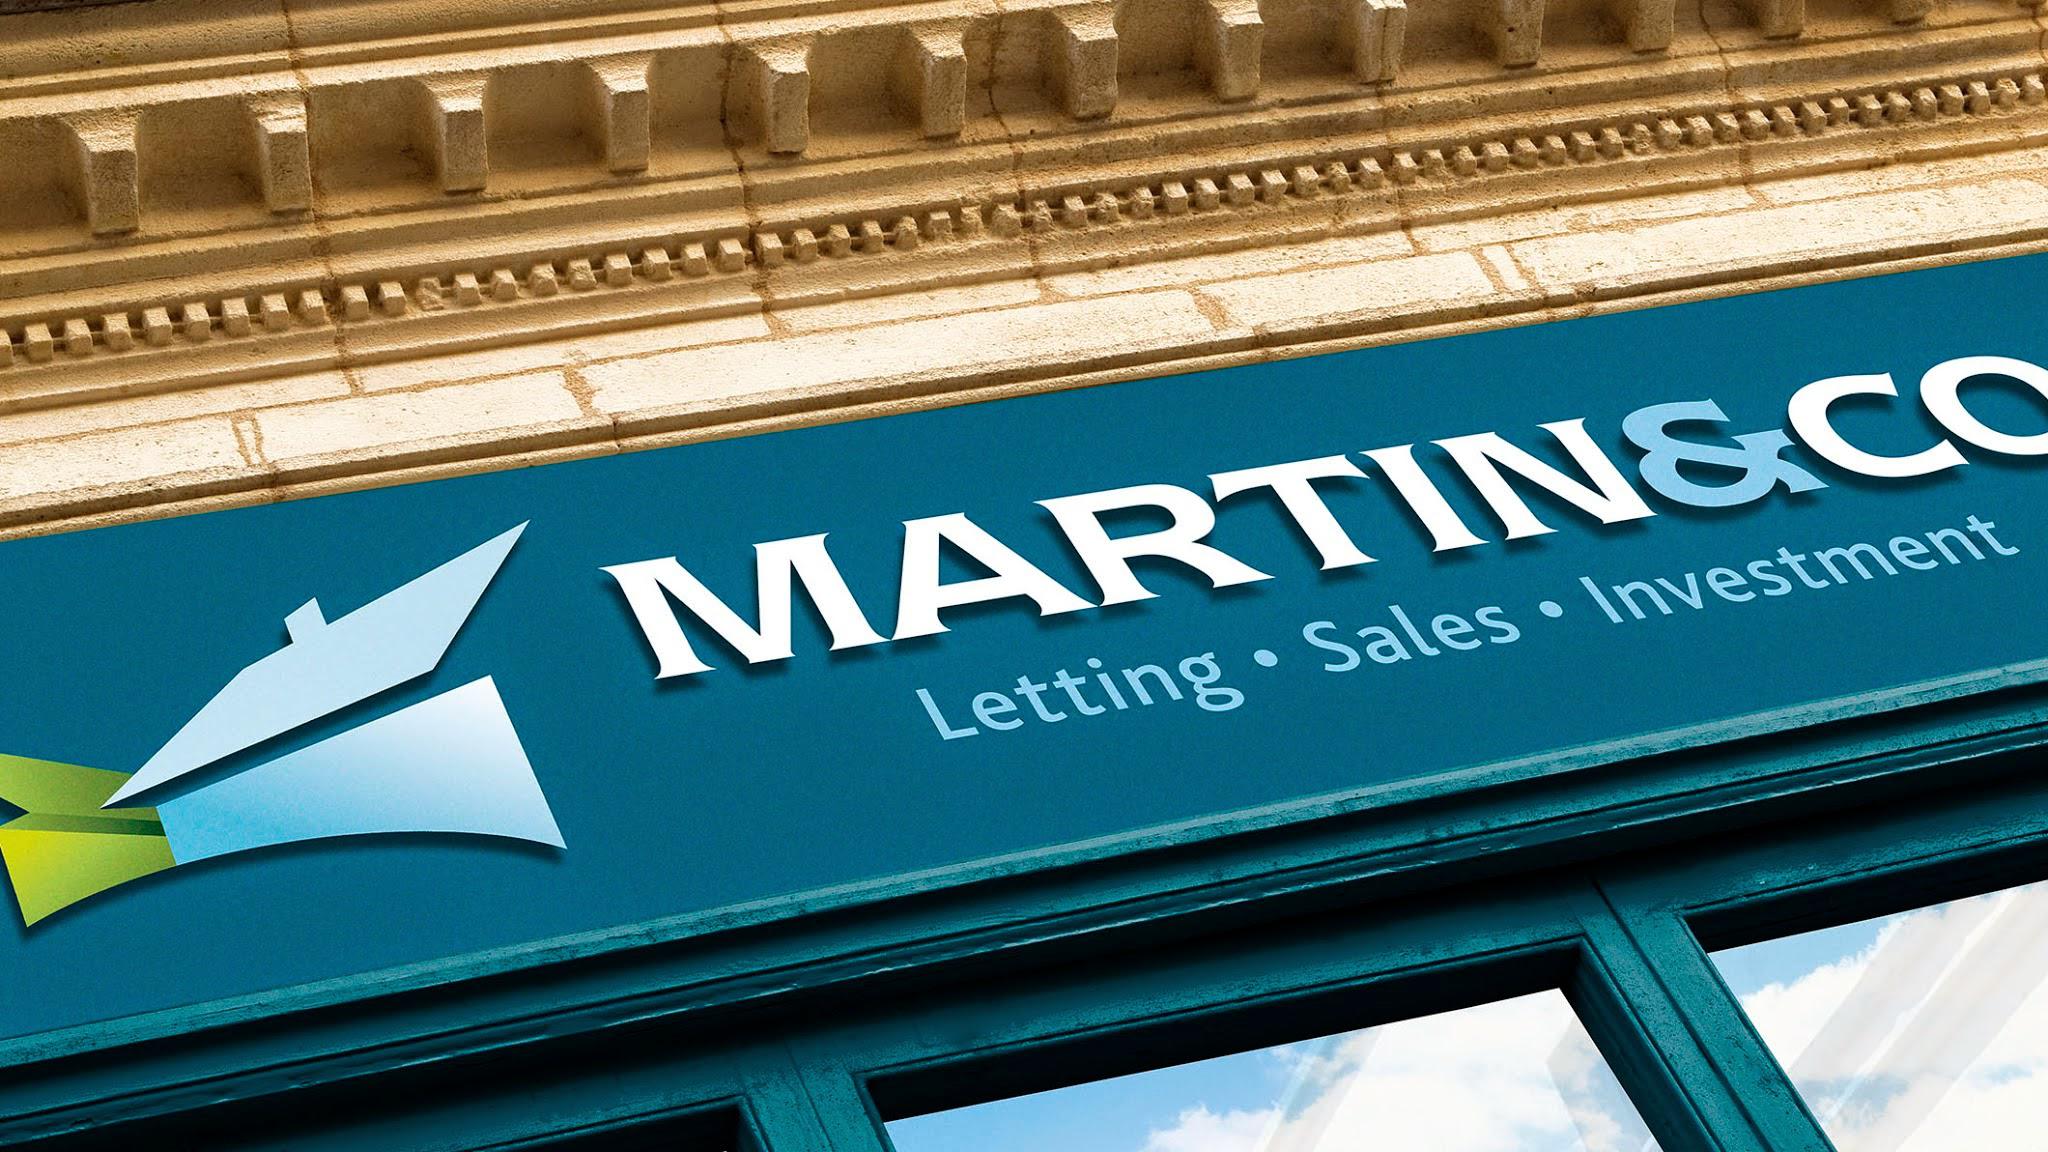 Images Martin & Co Slough Lettings & Estate Agents